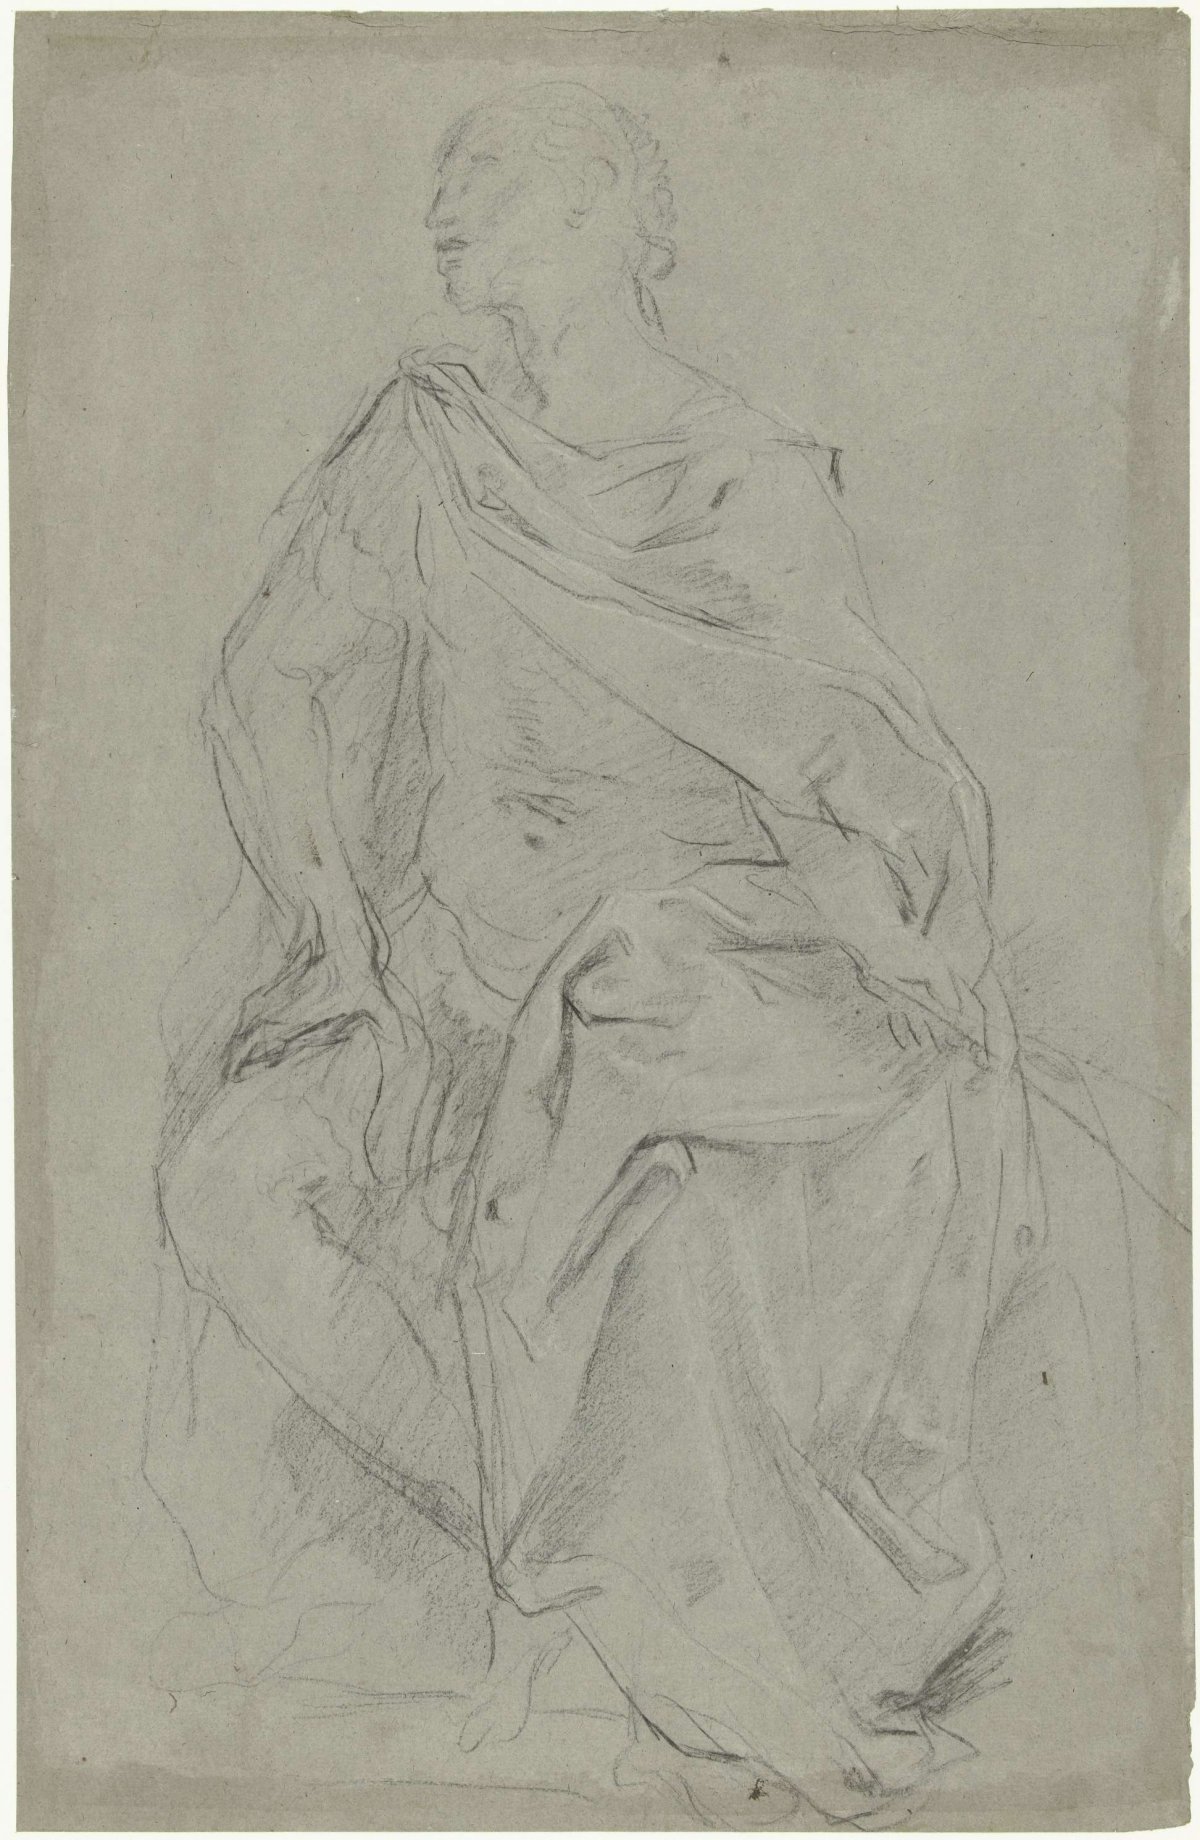 Study for a seated crowned figure, Giacomo Sementi, 1625 - 1635